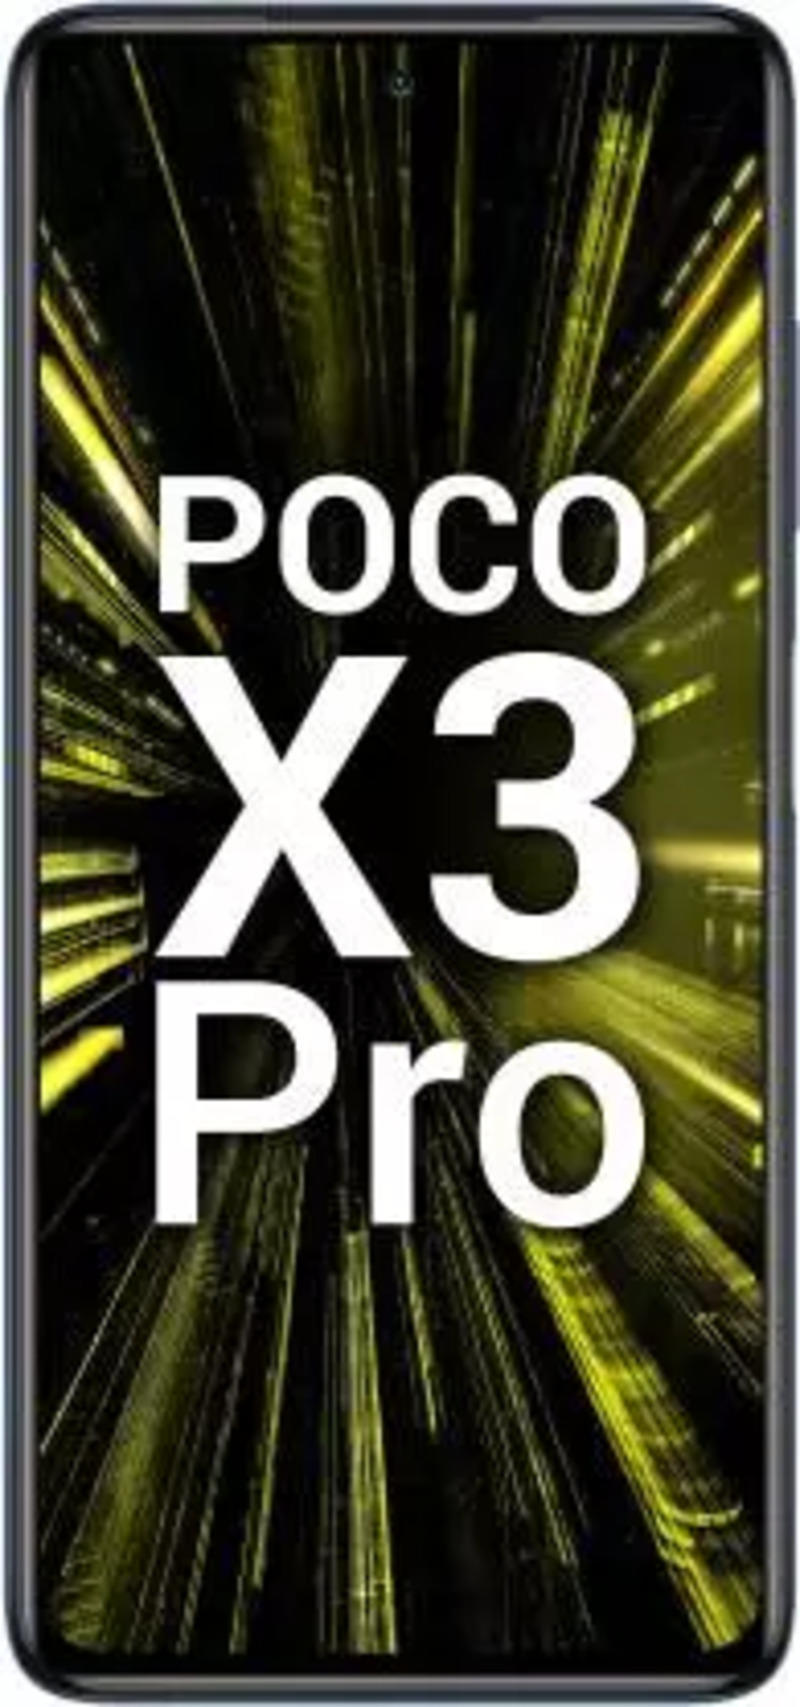 Poco X3 PRO (5160 mAh Battery, 128 GB Storage) Price and features